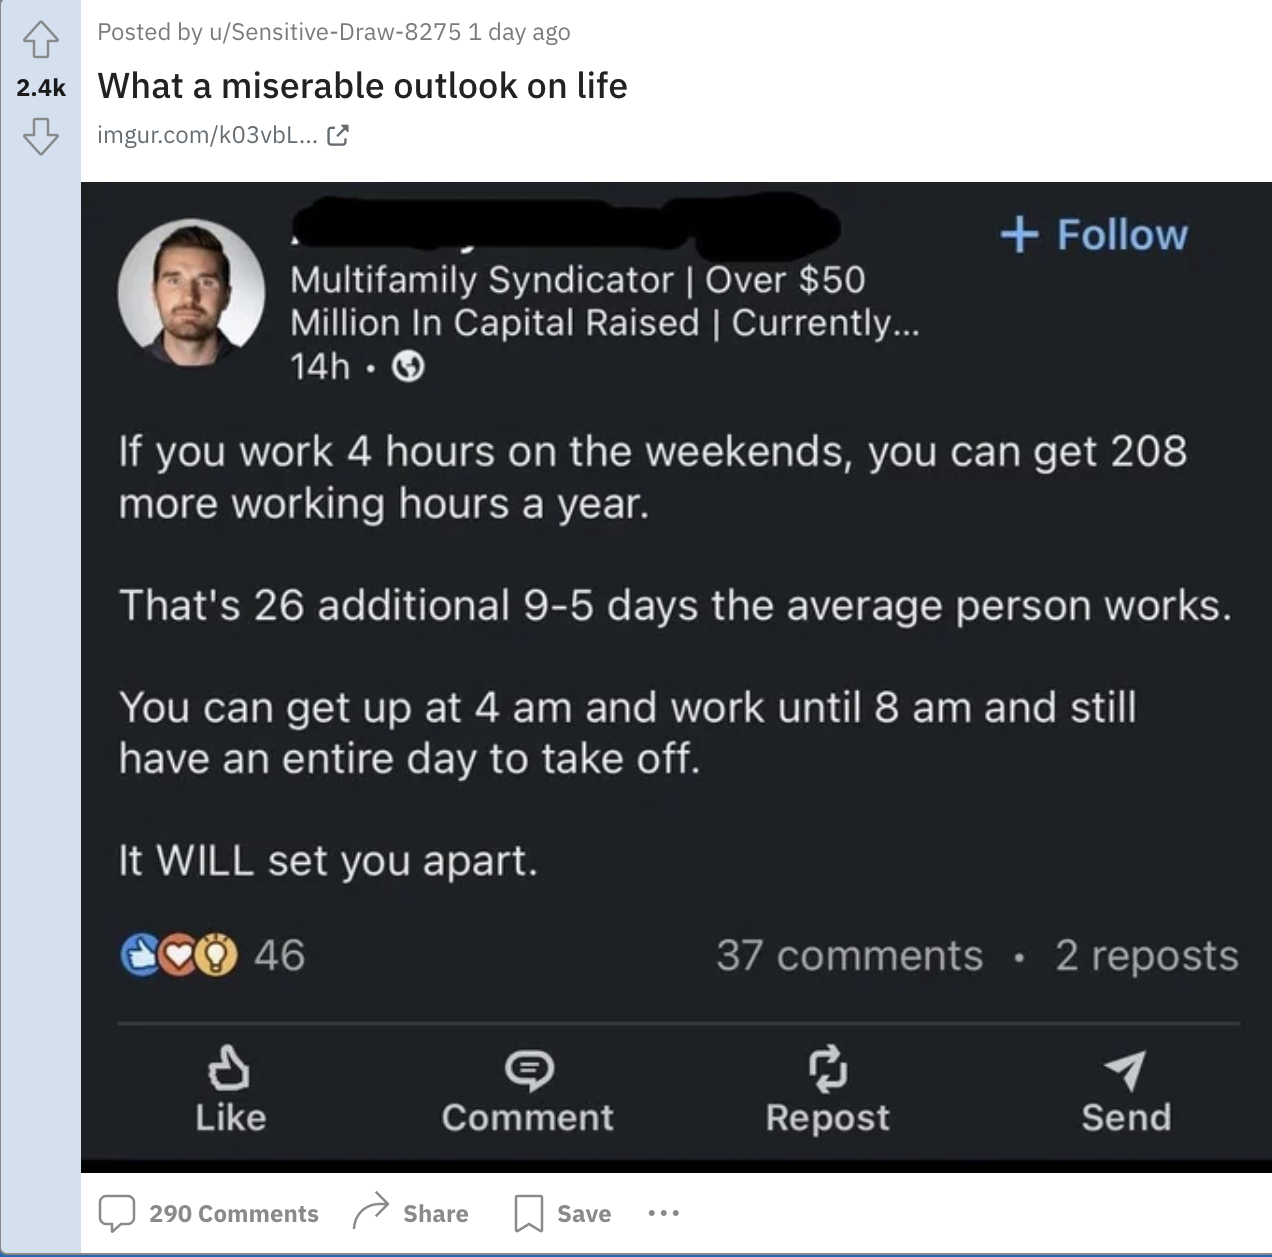 screenshot - Posted by uSensitiveDraw8275 1 day ago What a miserable outlook on life imgur.comk03vbl... Multifamily Syndicator | Over $50 Million In Capital Raised | Currently... 14h. If you work 4 hours on the weekends, you can get 208 more working hours